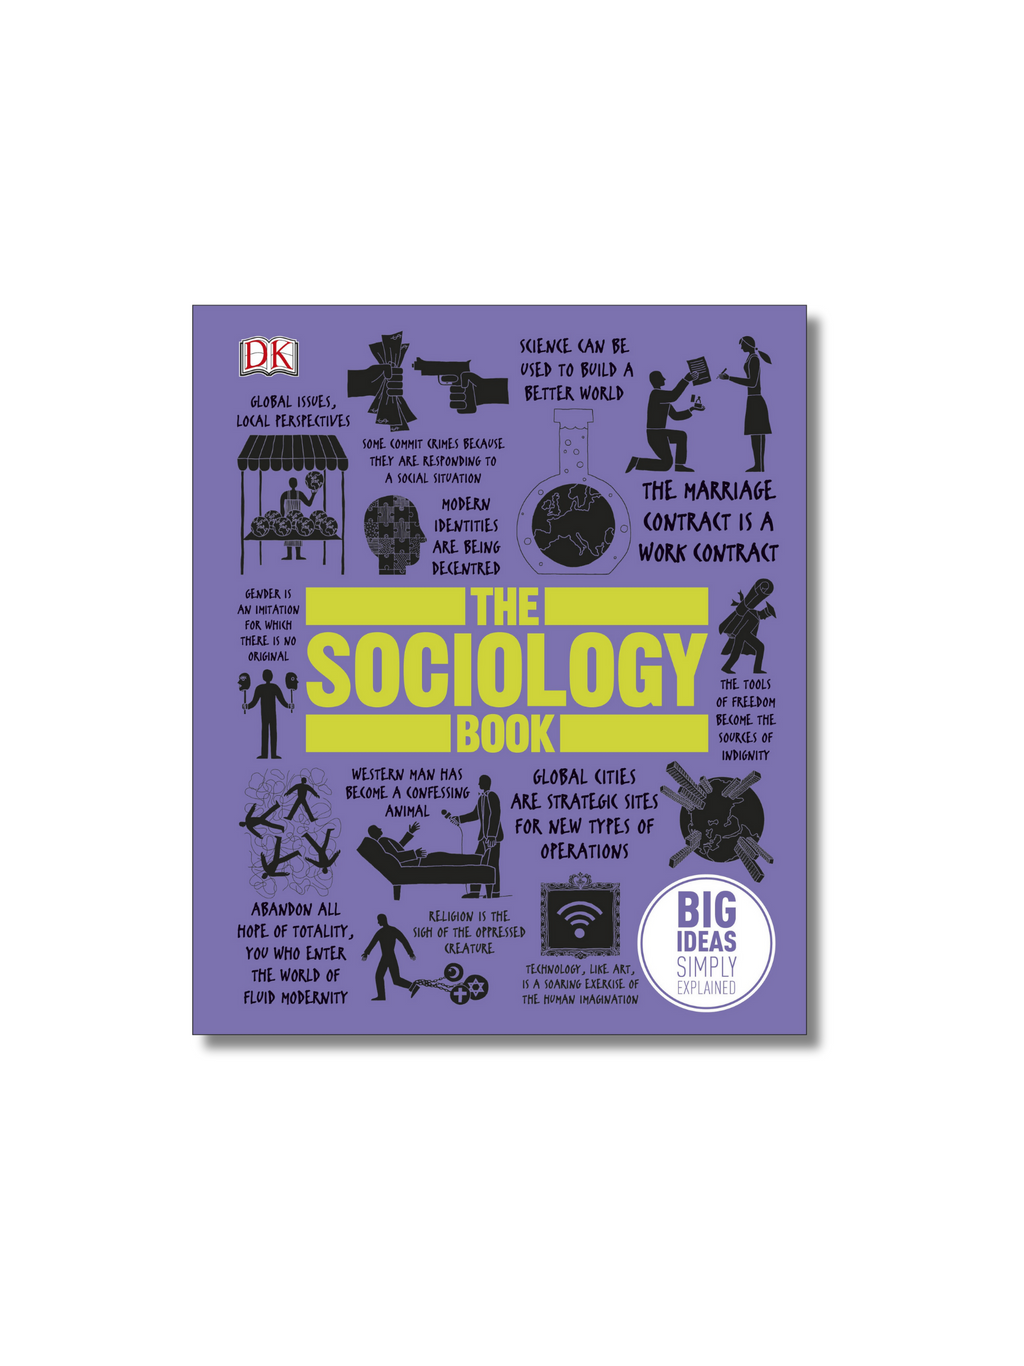 The Sociology Book: Big Ideas Simply Explained